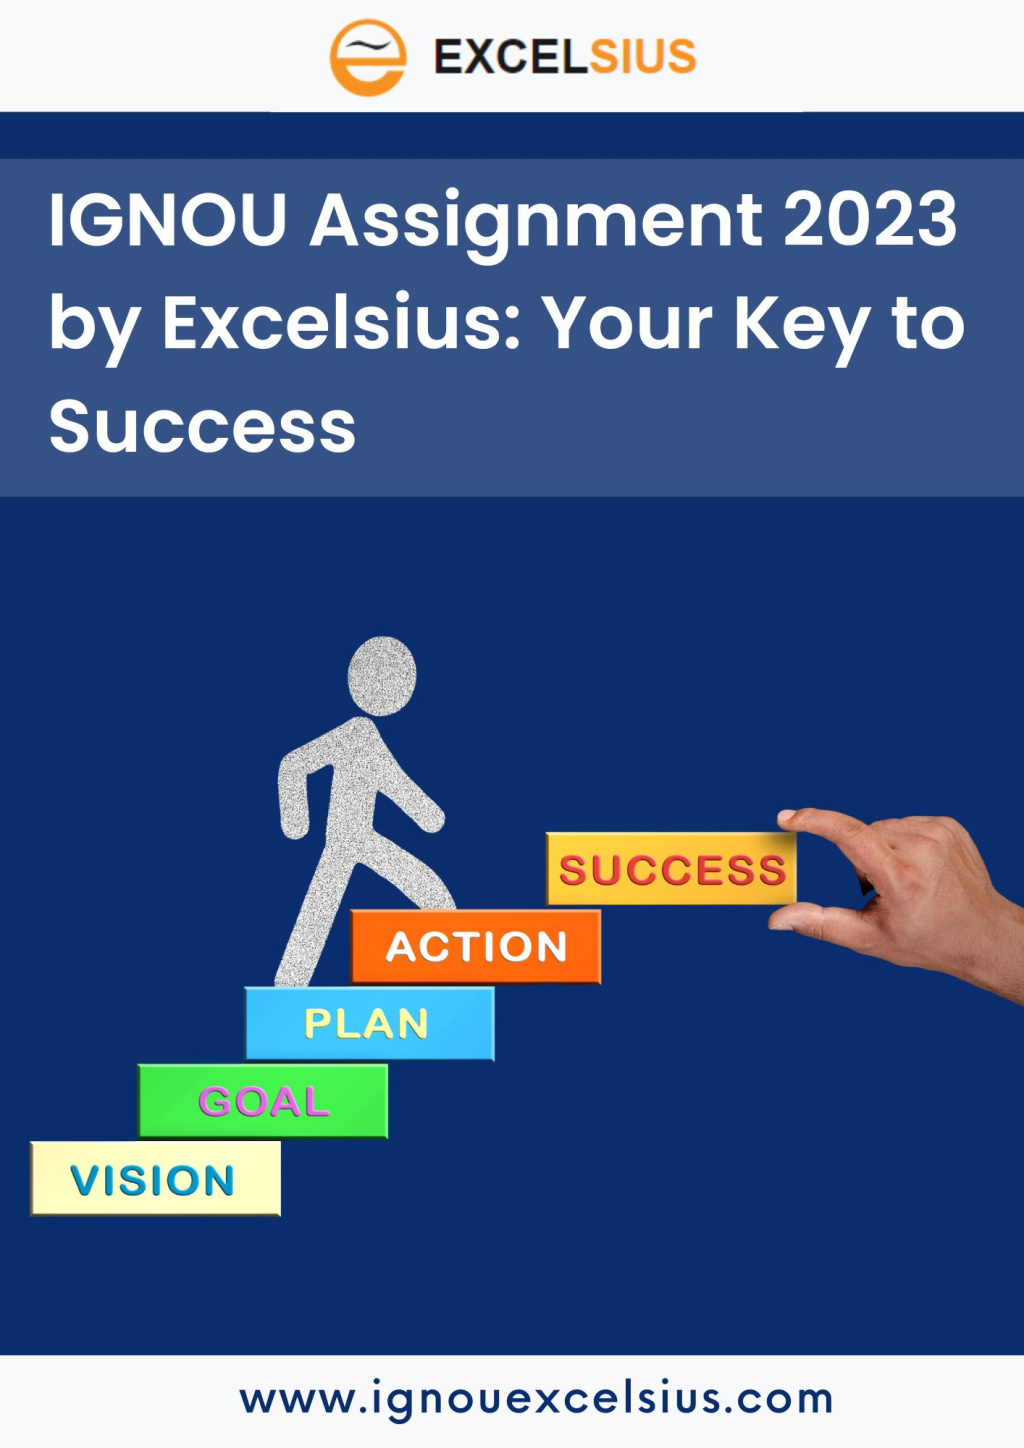 Ignou Assignment 2023 by Excelsius: Your Key to Success